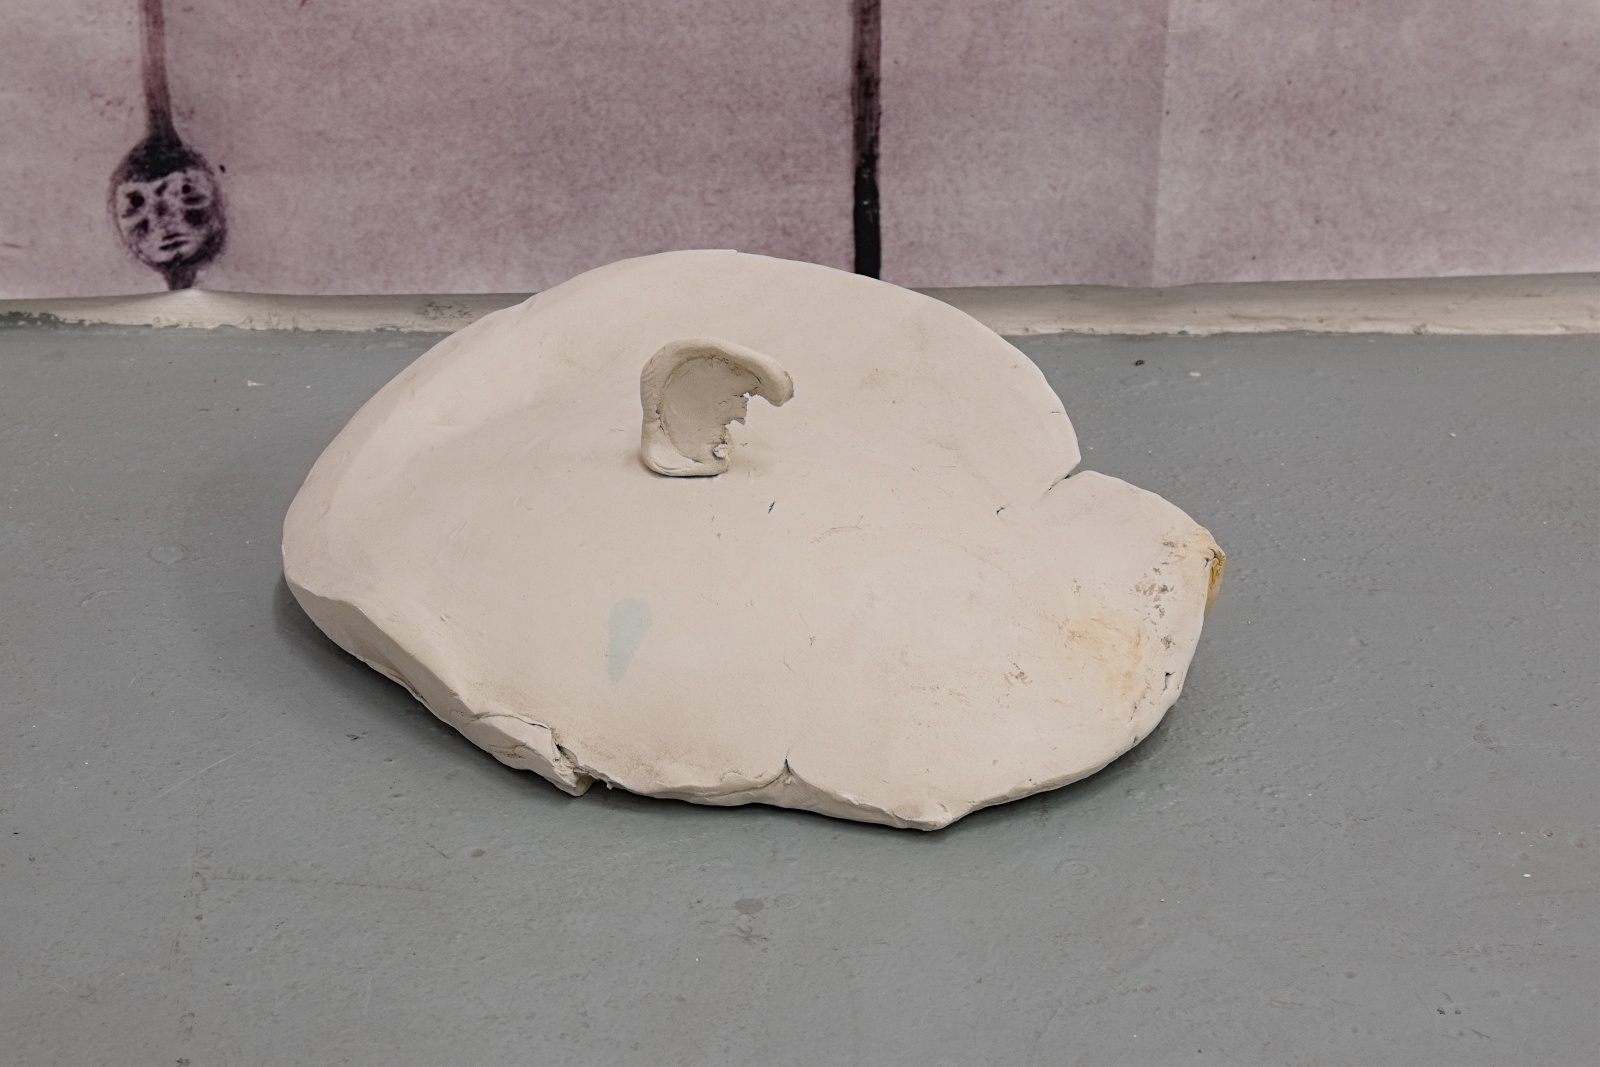 "Smashed head #002", 2018, dropped head sculpture, clay, appr. 30 x 24 x 13 cm